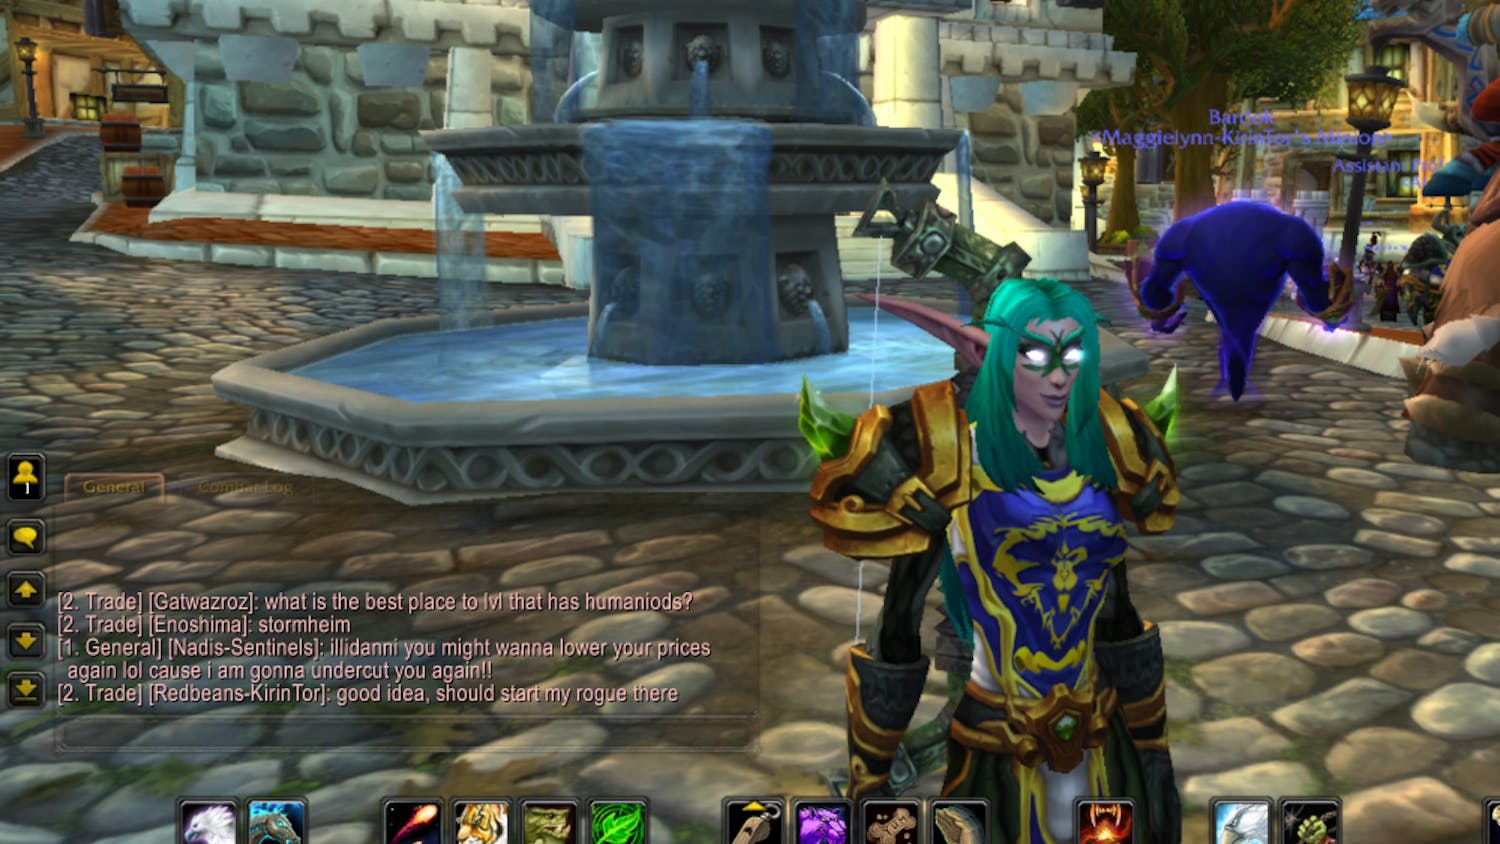 Crying because I finally got updated gear that I won't have to transmog to look good.